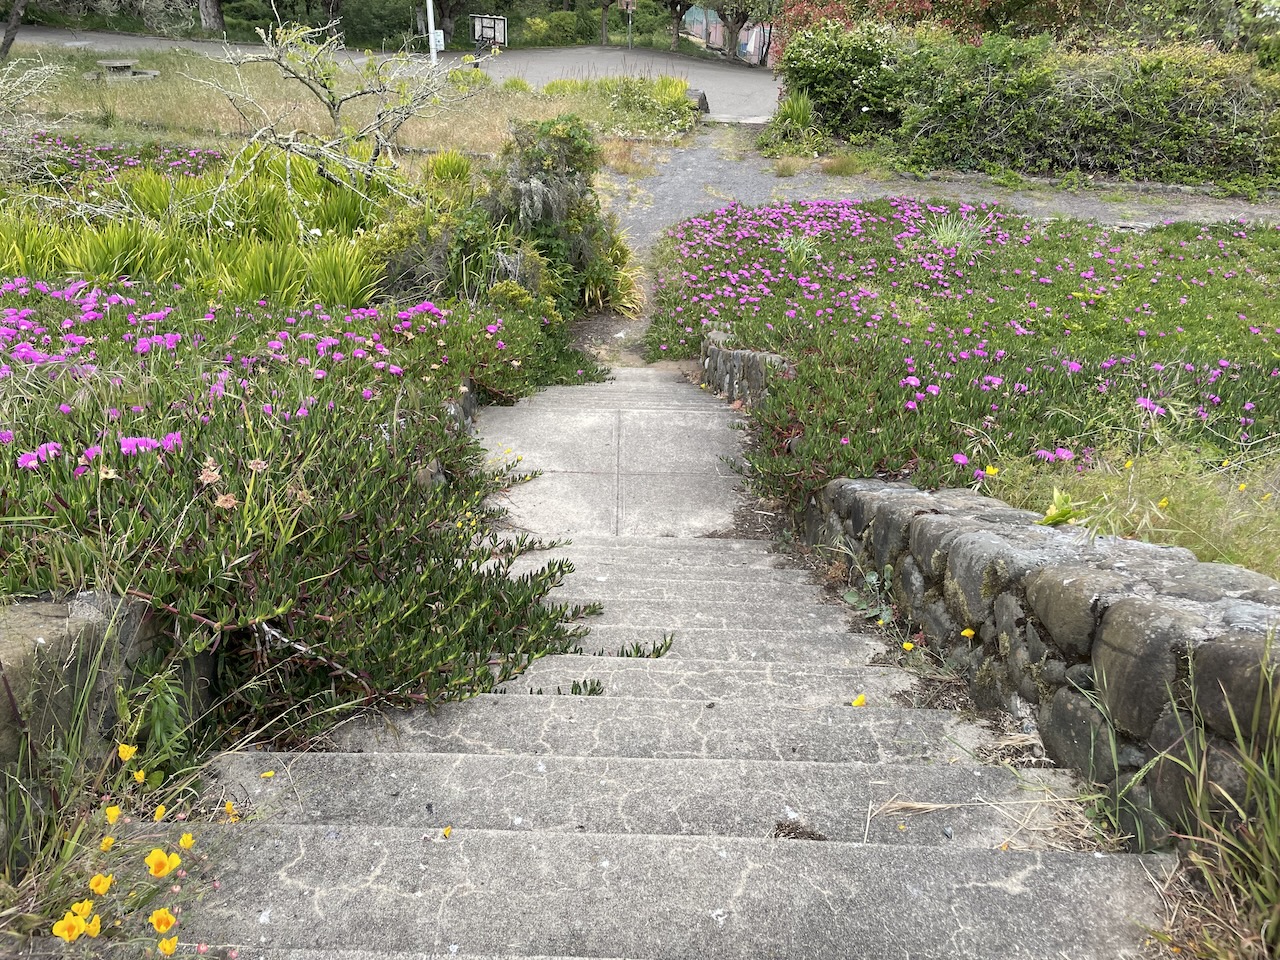 Overgrown stairs, with iceplant, rosemary and California poppies creeping over the edge